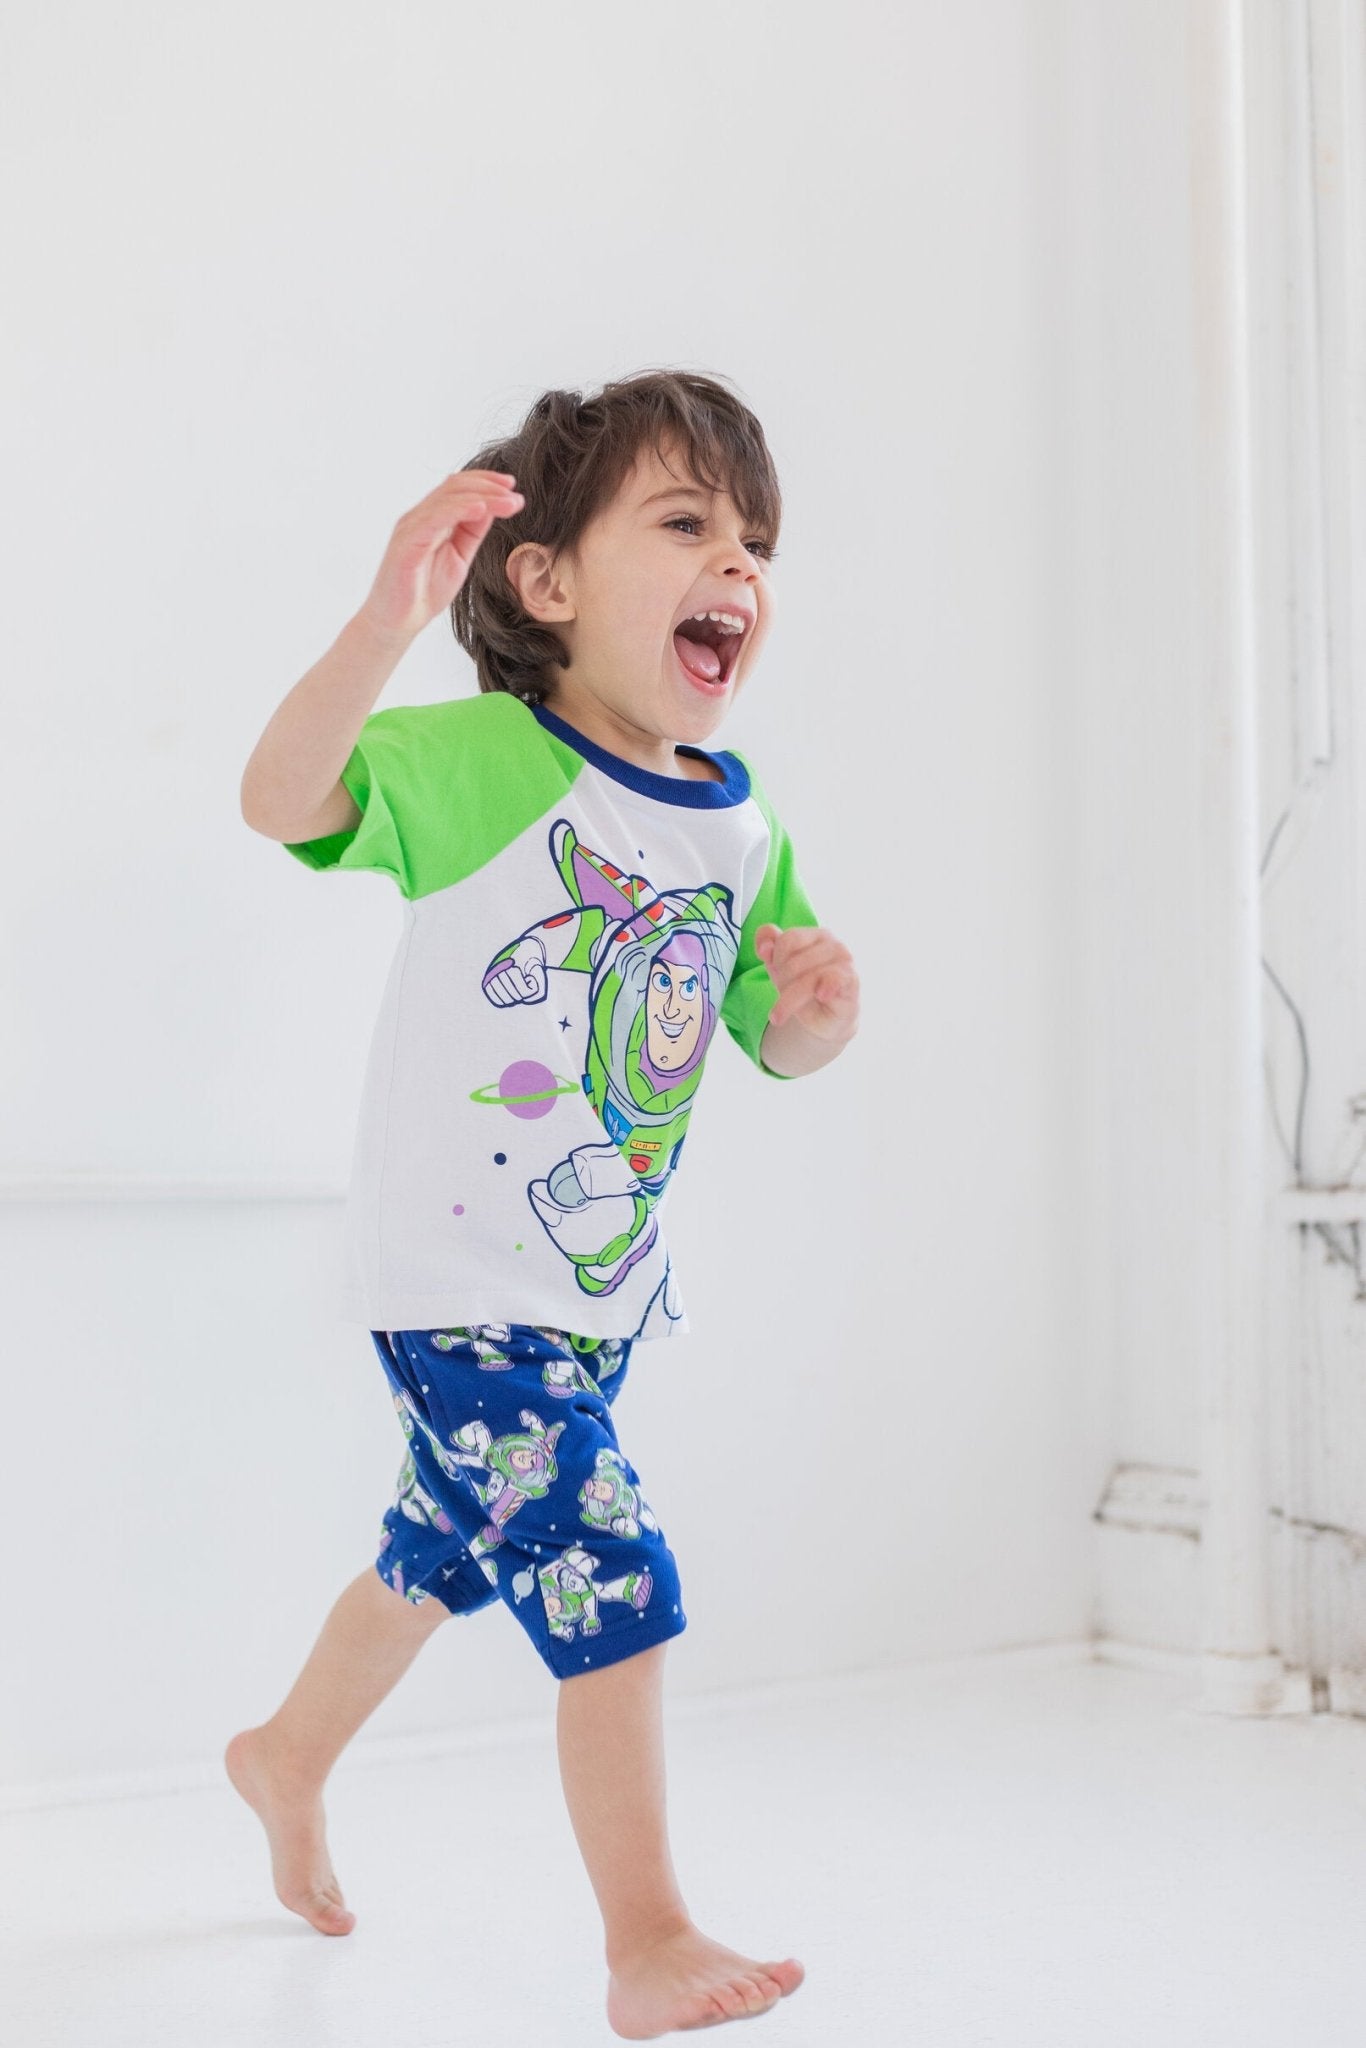 Disney Toy Story Buzz Lightyear T-Shirt and French Terry Shorts Outfit Set - imagikids